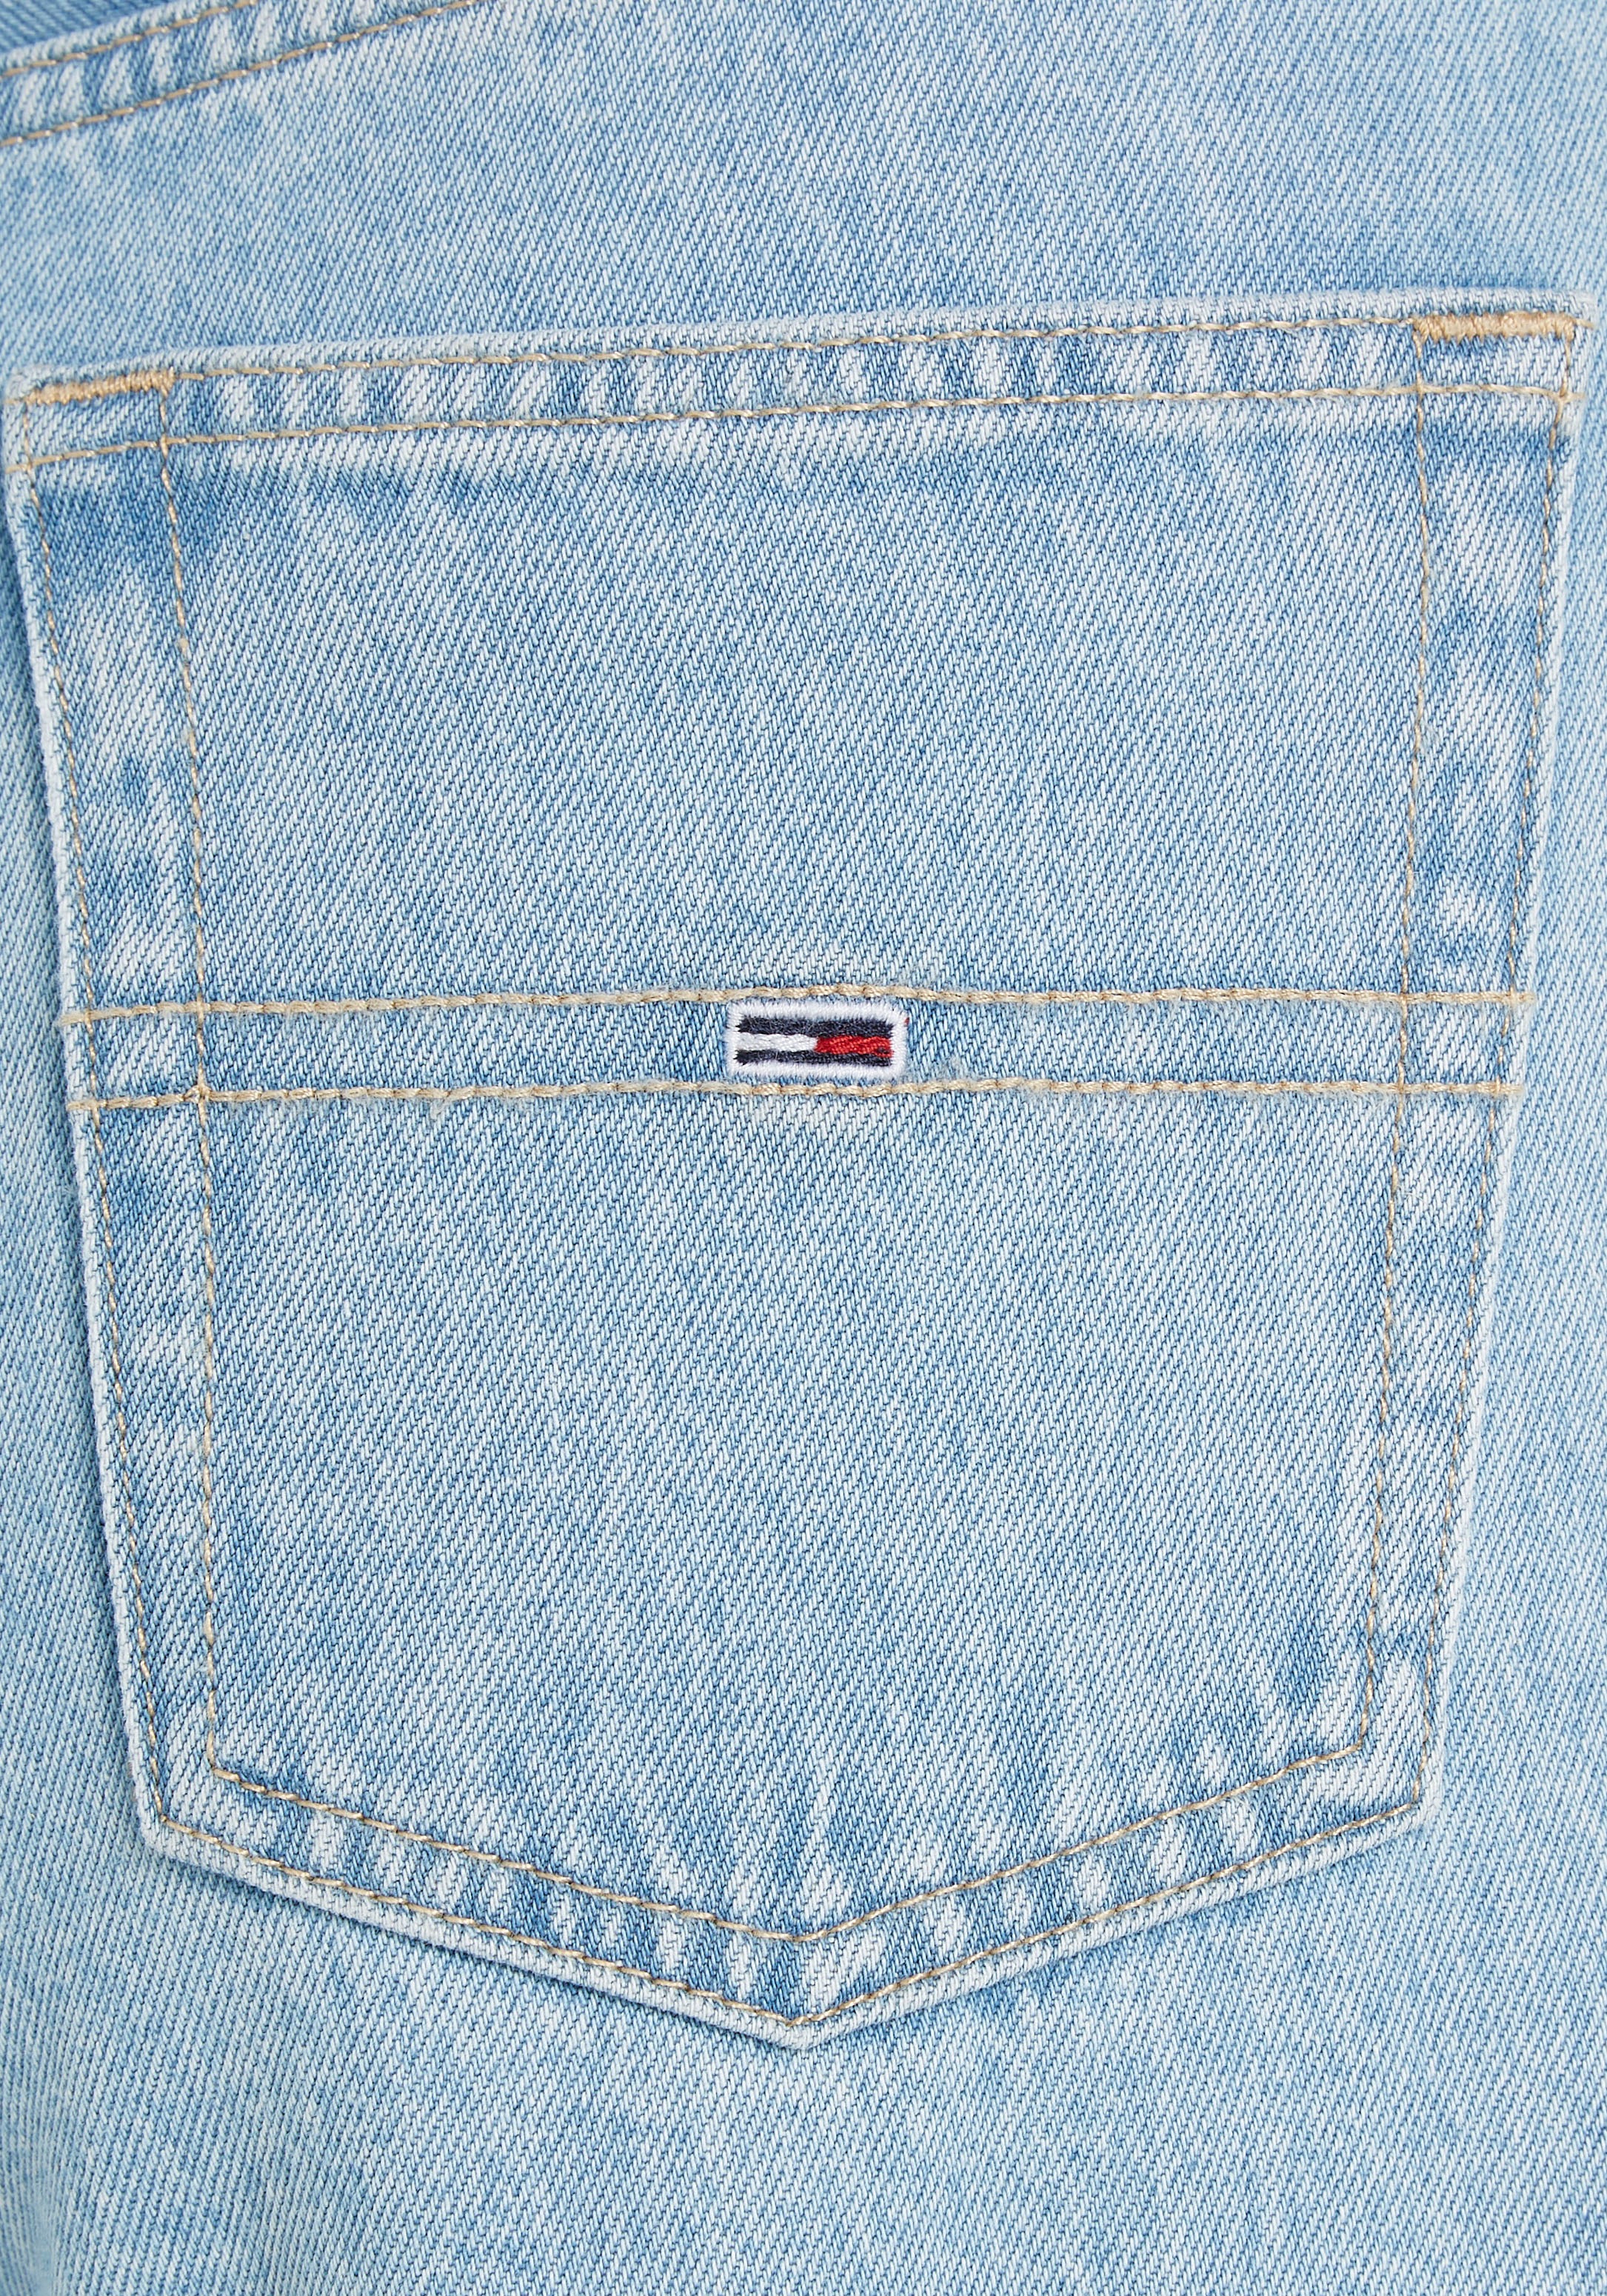 online Jeans Weite bei Logobadges Jeans Tommy Jeans, OTTO Tommy mit